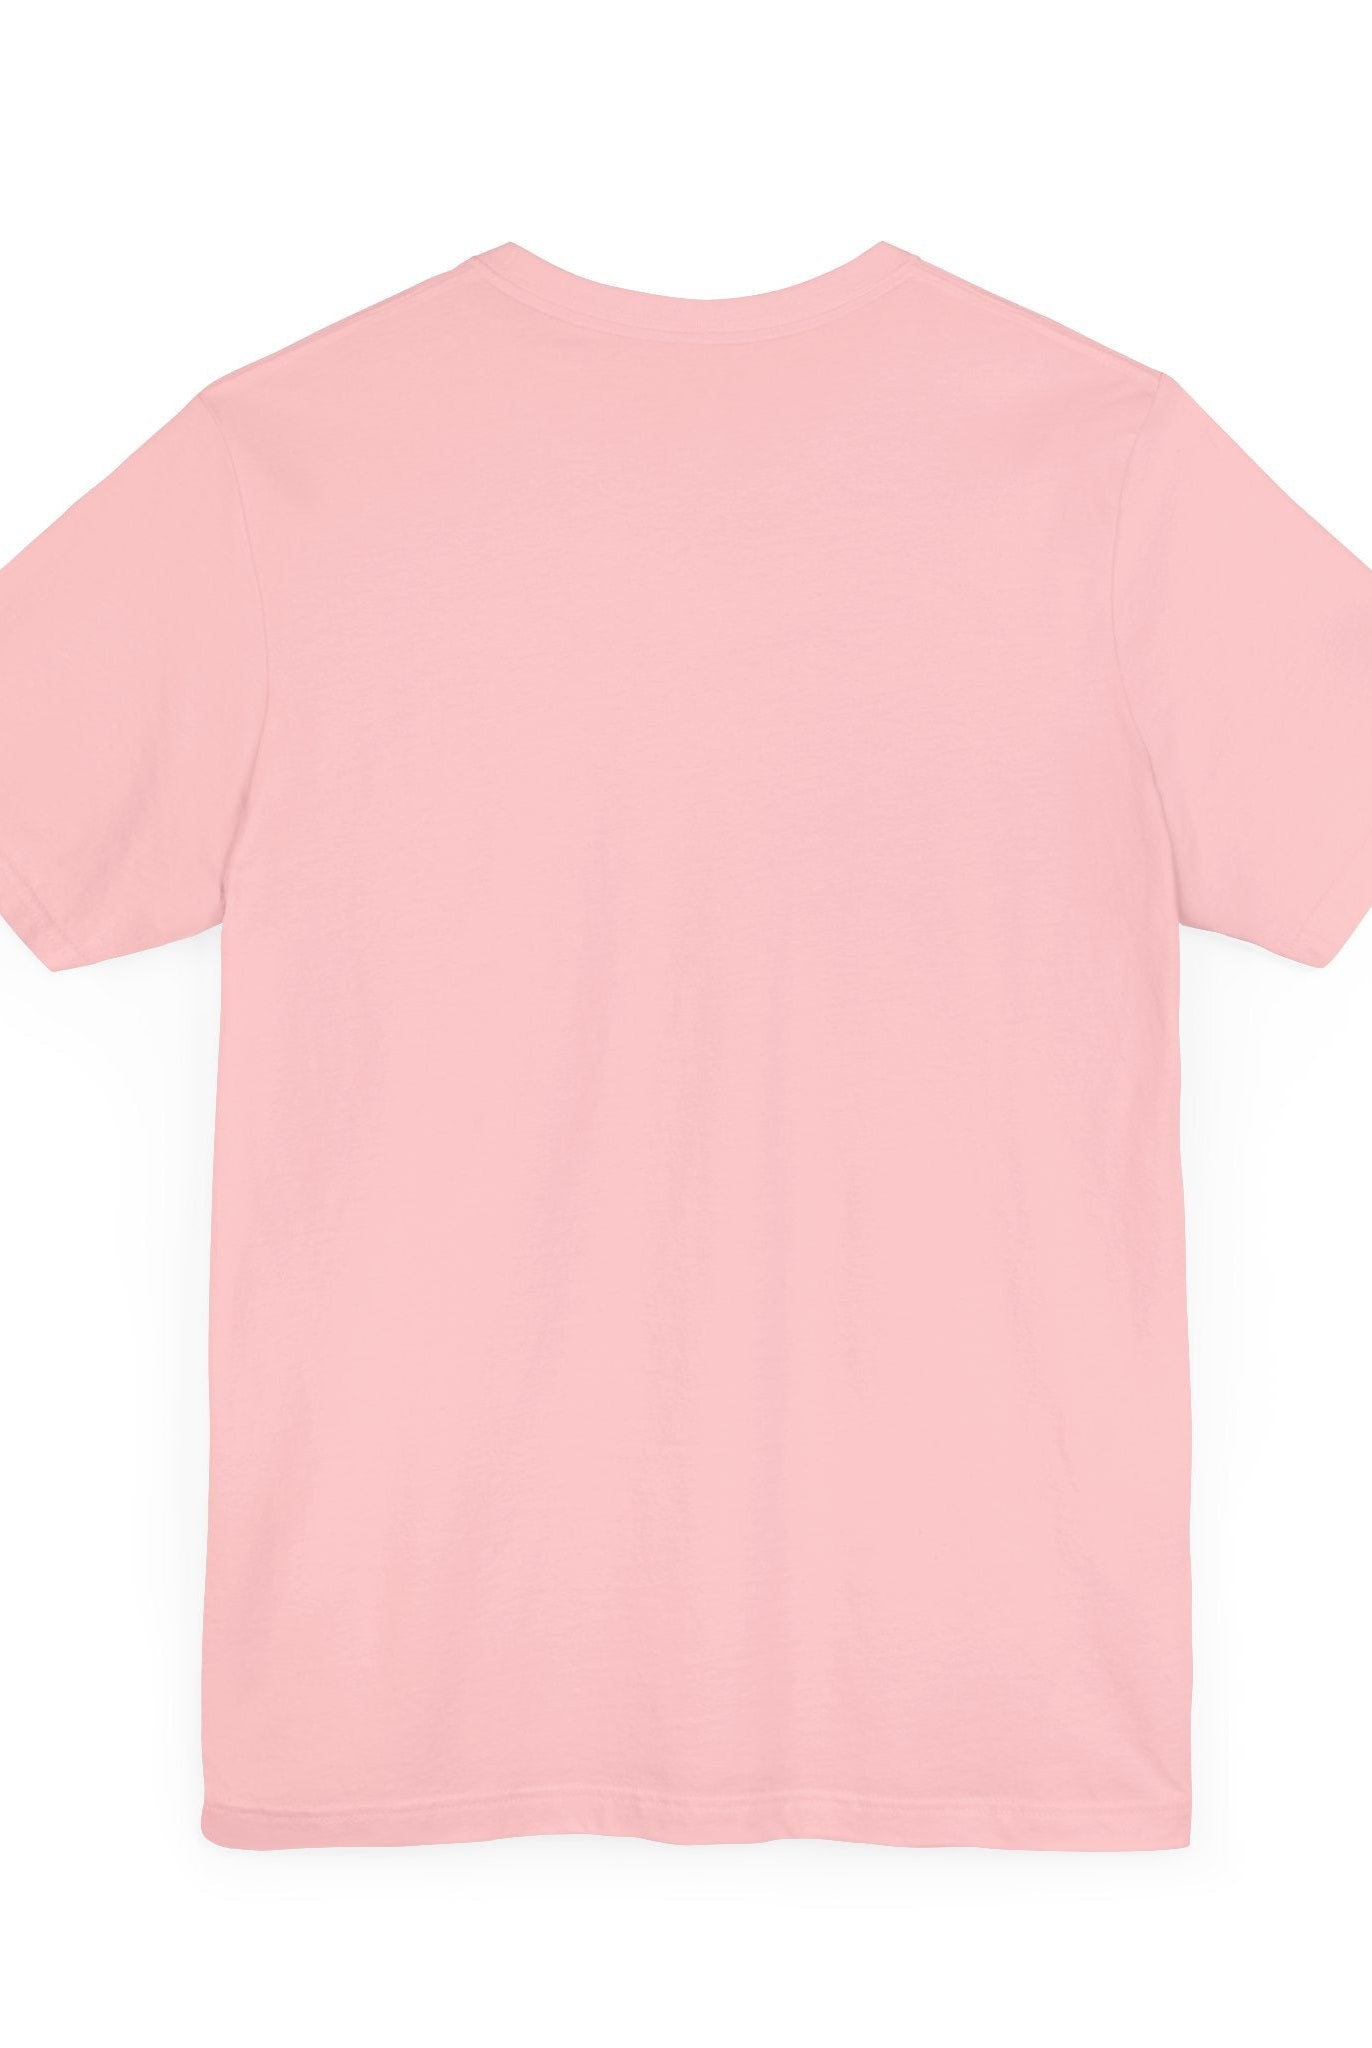 Direct-to-garment printed pink t-shirt with white logo from Be Amazing - Bella & Canvas - Soulshinecreators - Unisex